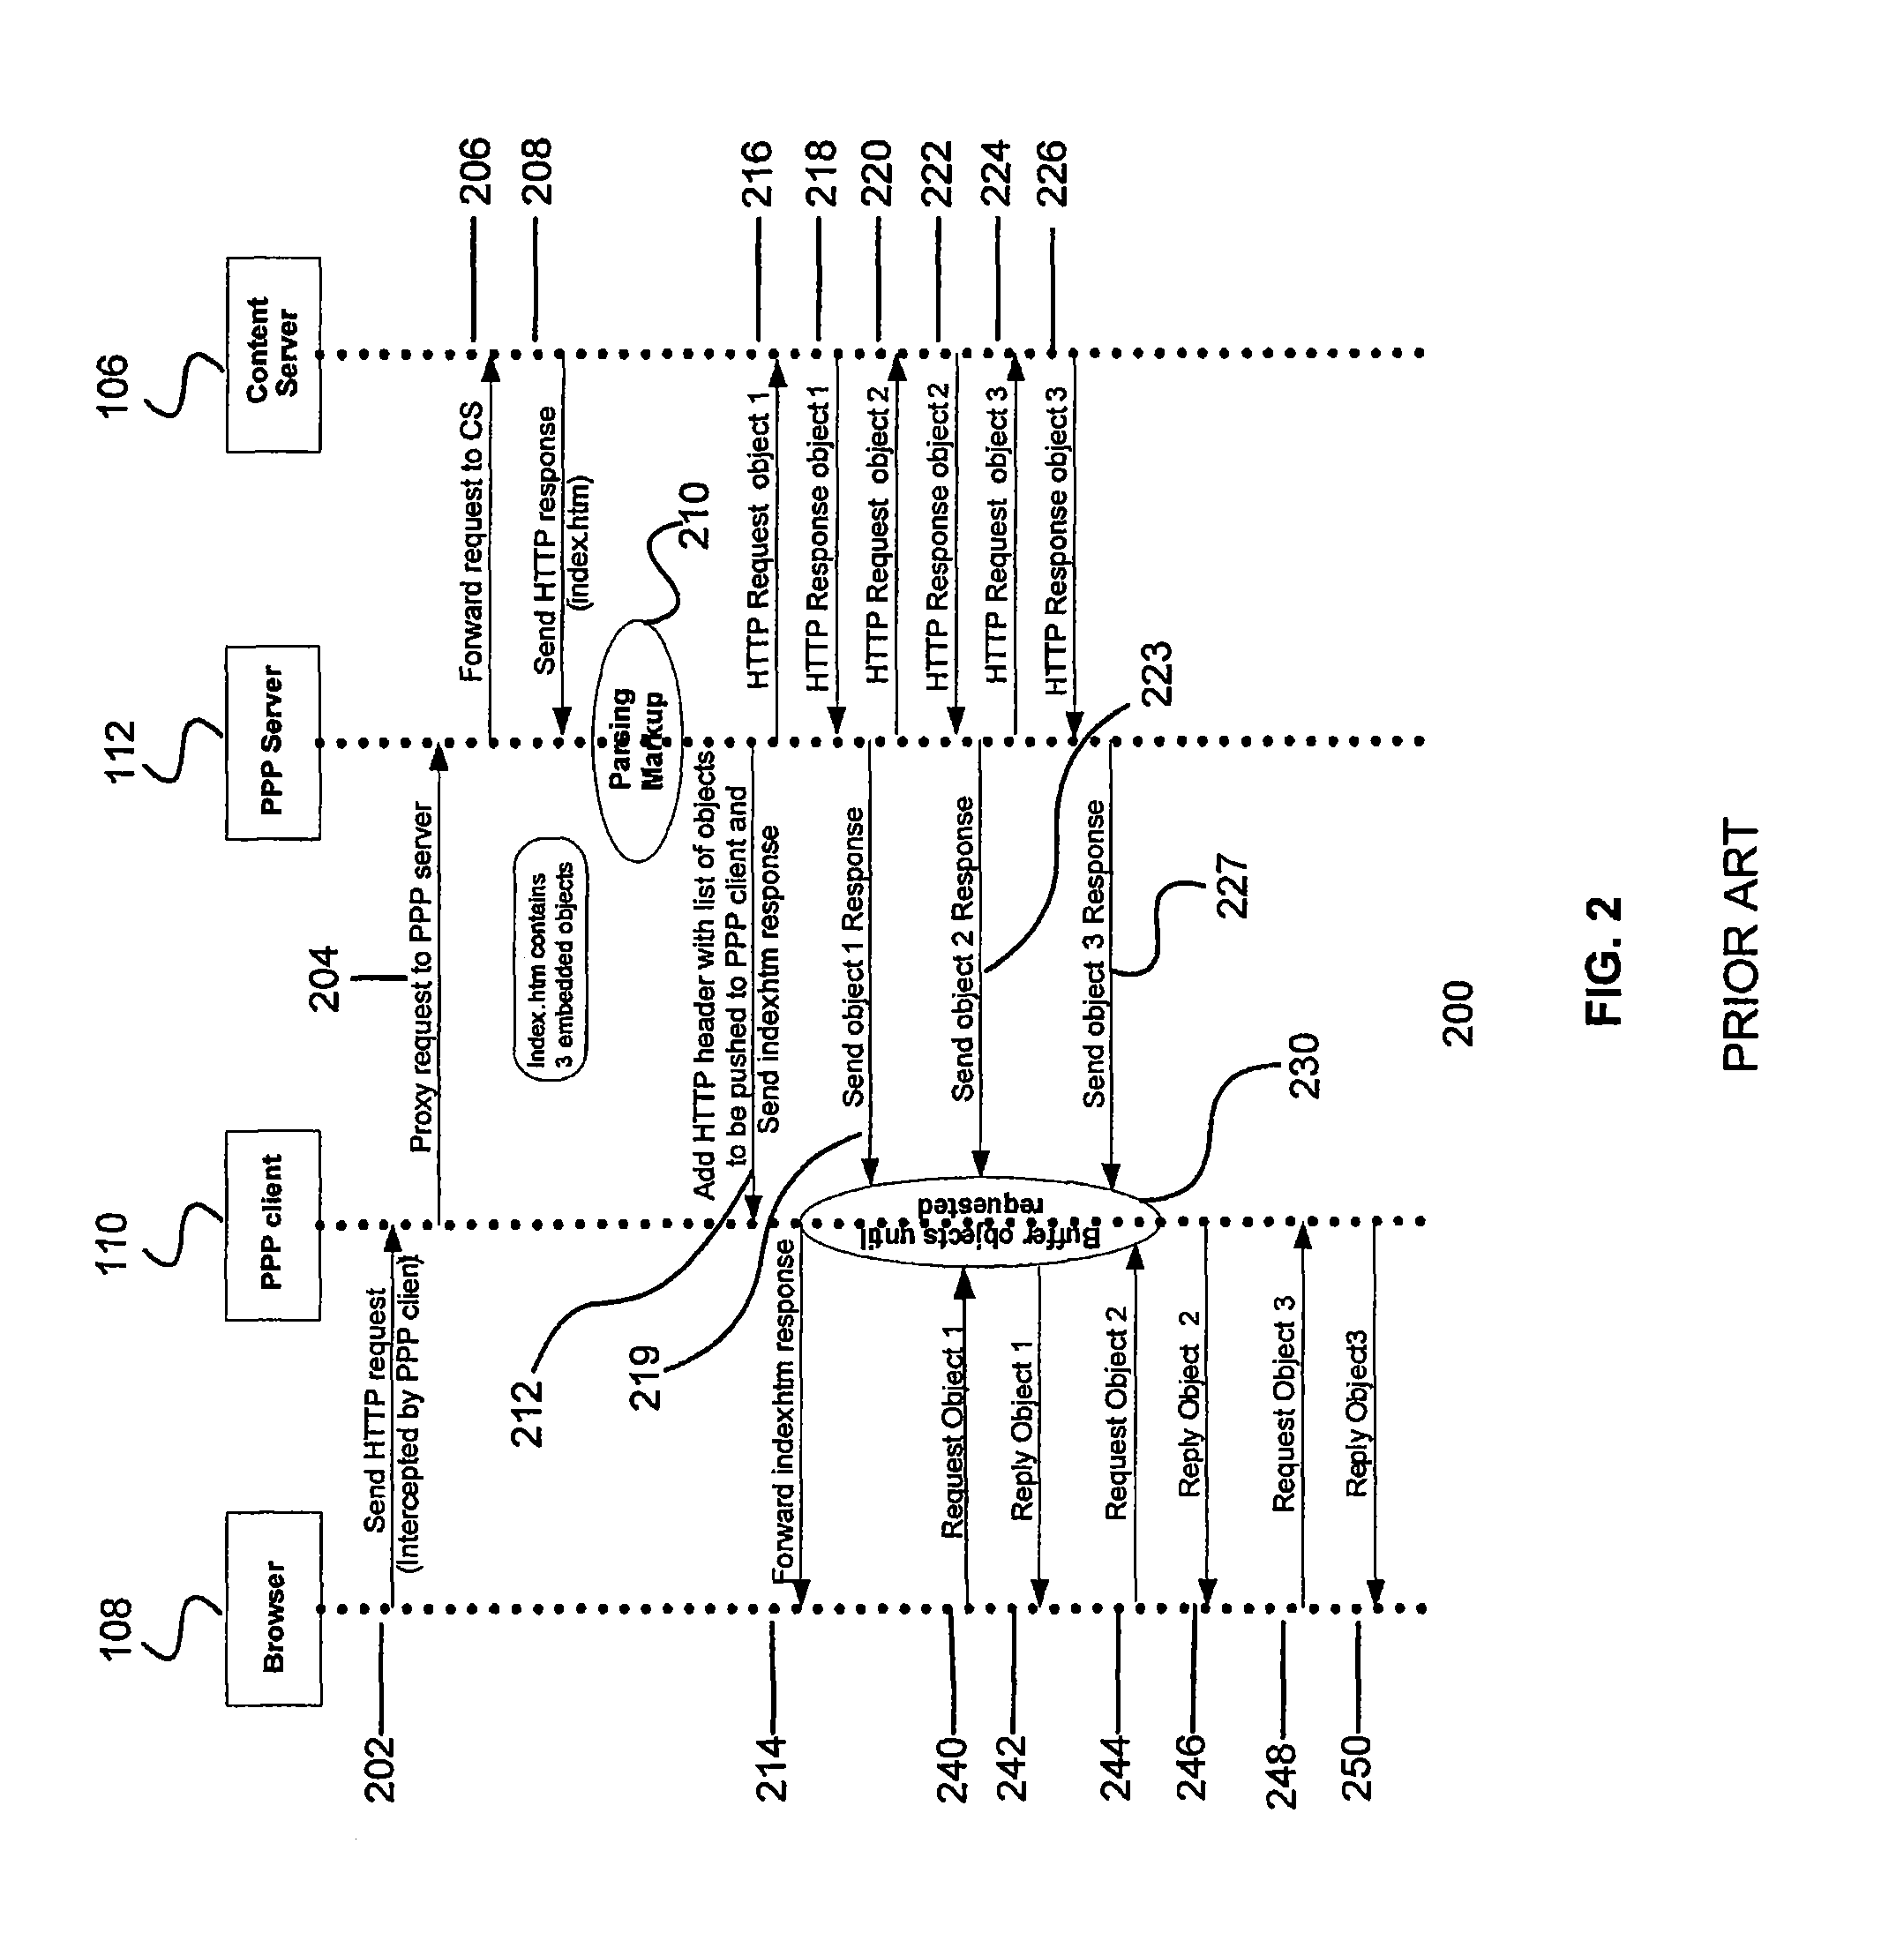 Cache based enhancement to optimization protocol